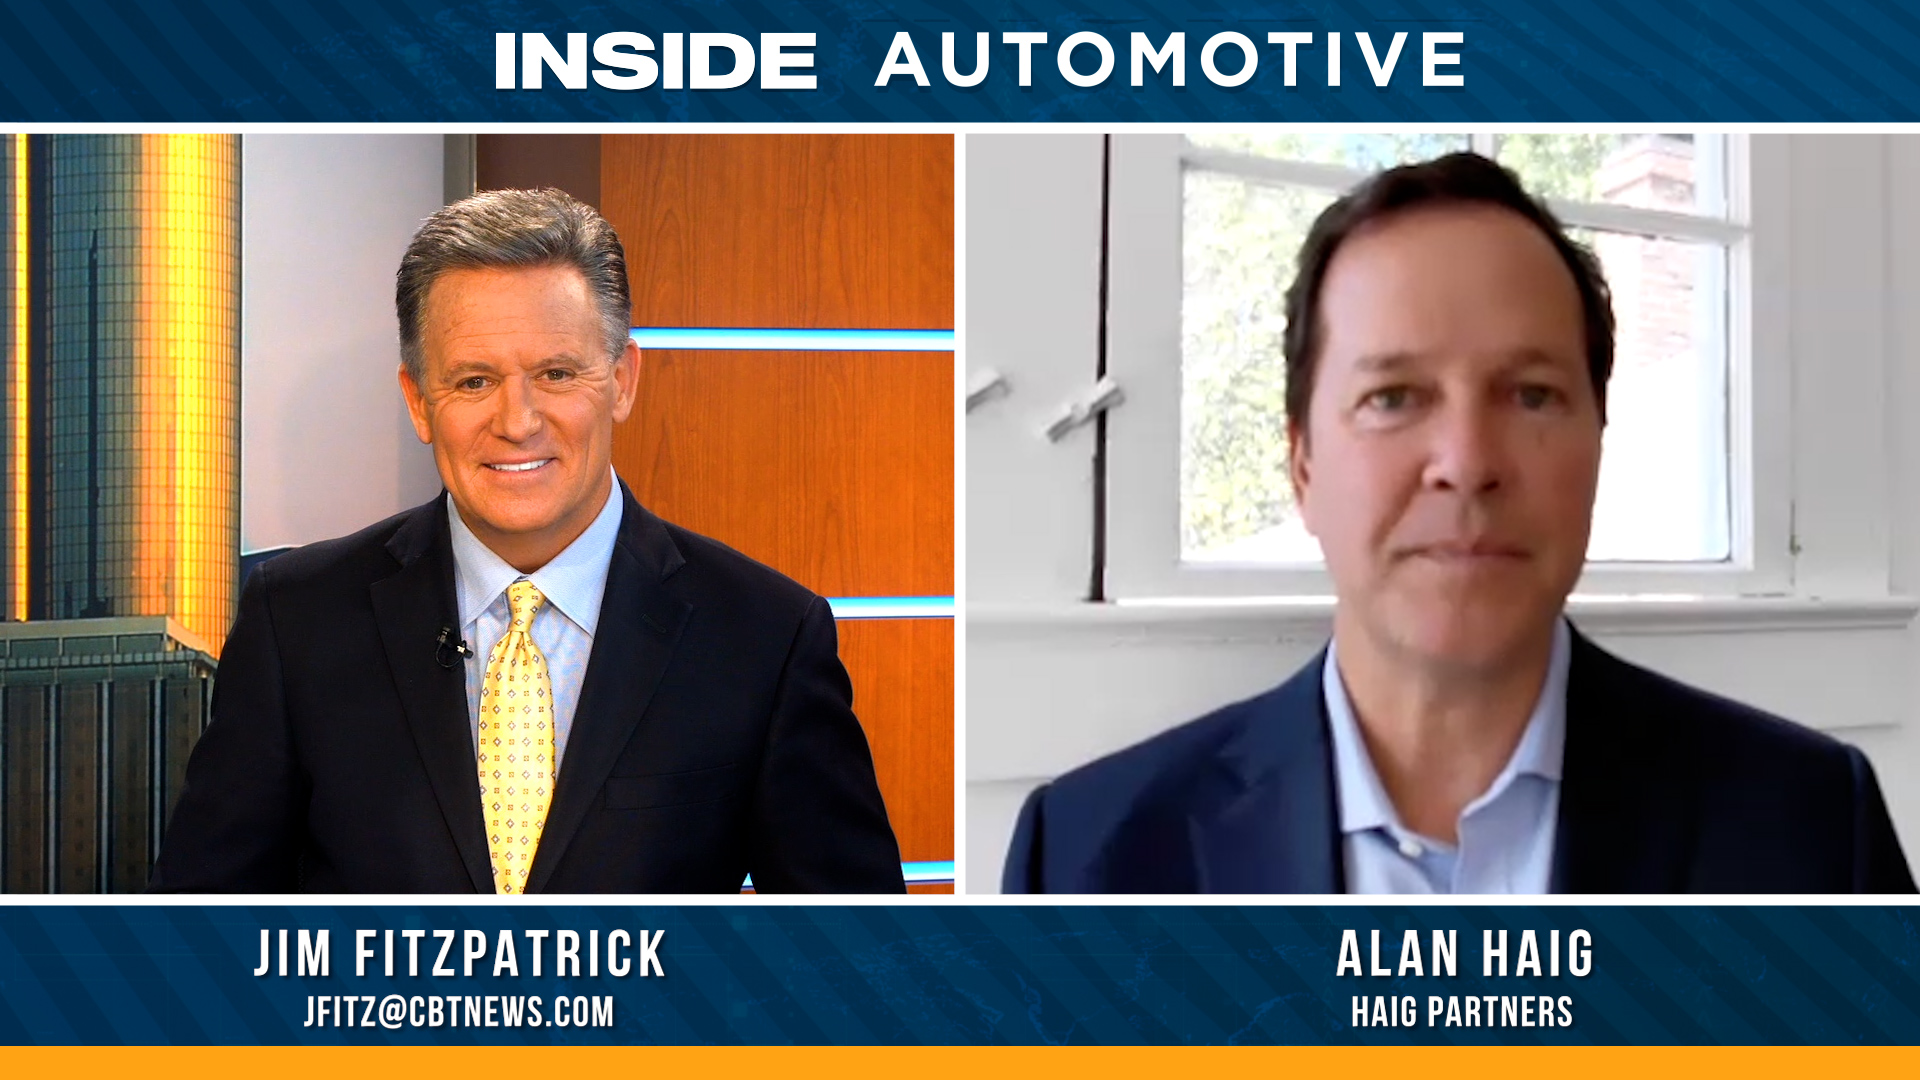 Alan Haig joins Inside Automotive to discuss the current trends influencing dealership valuations and why he thinks the market will change